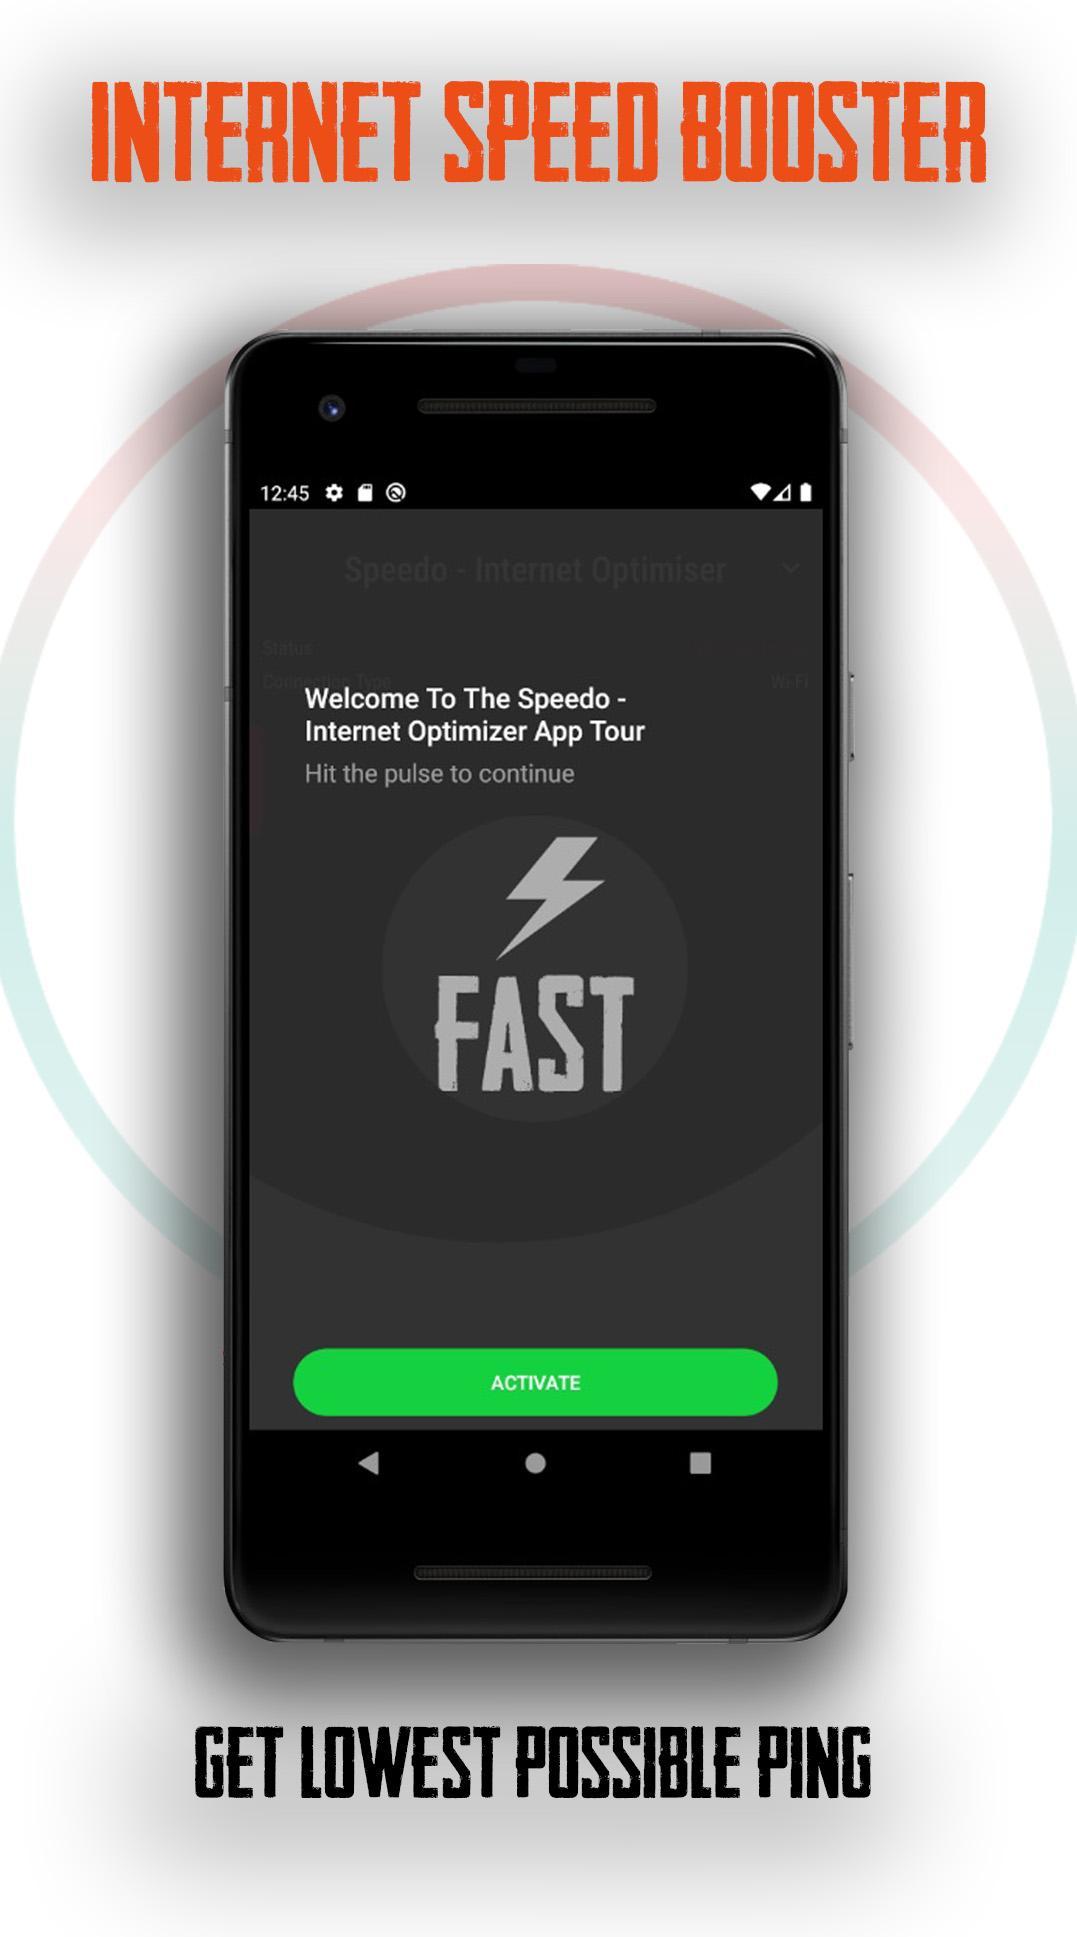 Speedo - Internet Speed Optimizer & Booster for Android - APK Download